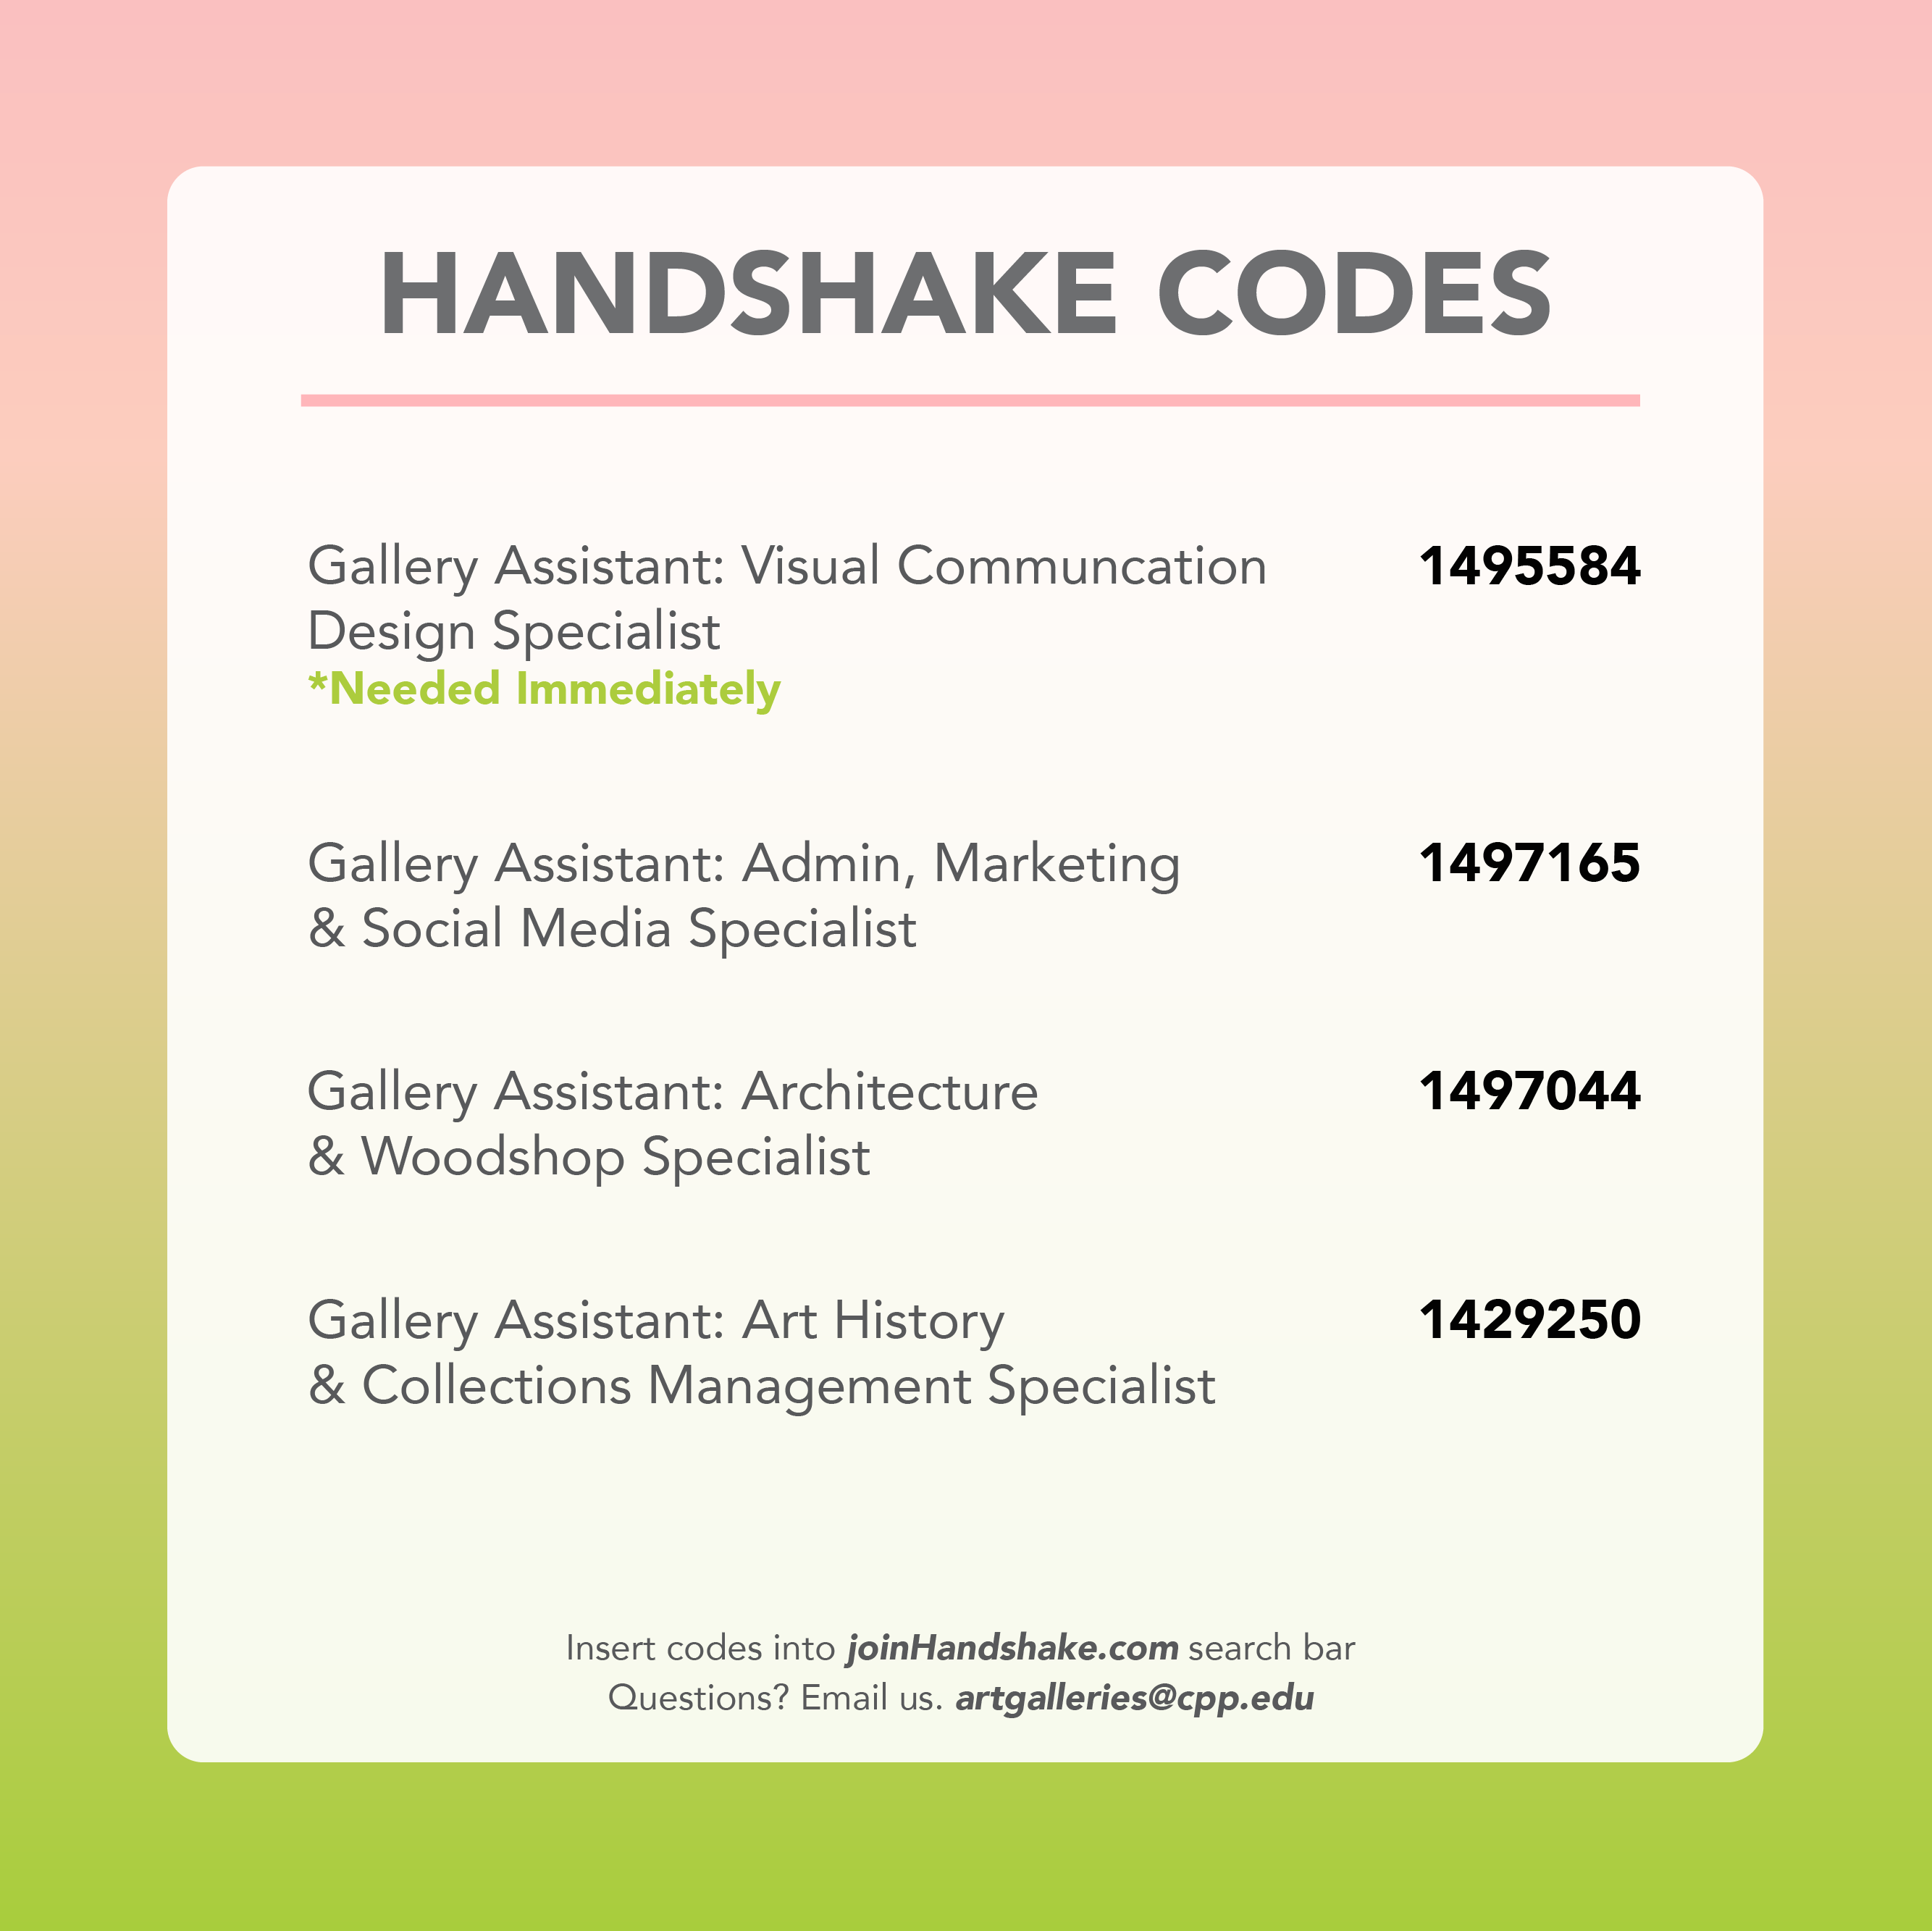 Handshake Codes: • Gallery Assistant: Visual Communication Design Specialist ....................... 1495584 • Gallery Assistant: Admin, Marketing & Social Media Specialist .................. 1497165 • Gallery Assistant: Architecture & Woodshop Specialist............................... 1497044 • Gallery Assistant: Art History & Collections Management Specialist........... 1429250  Insert codes into joinHandshake.com search bar. Questions? Email us at artgalleries@cpp.edu.